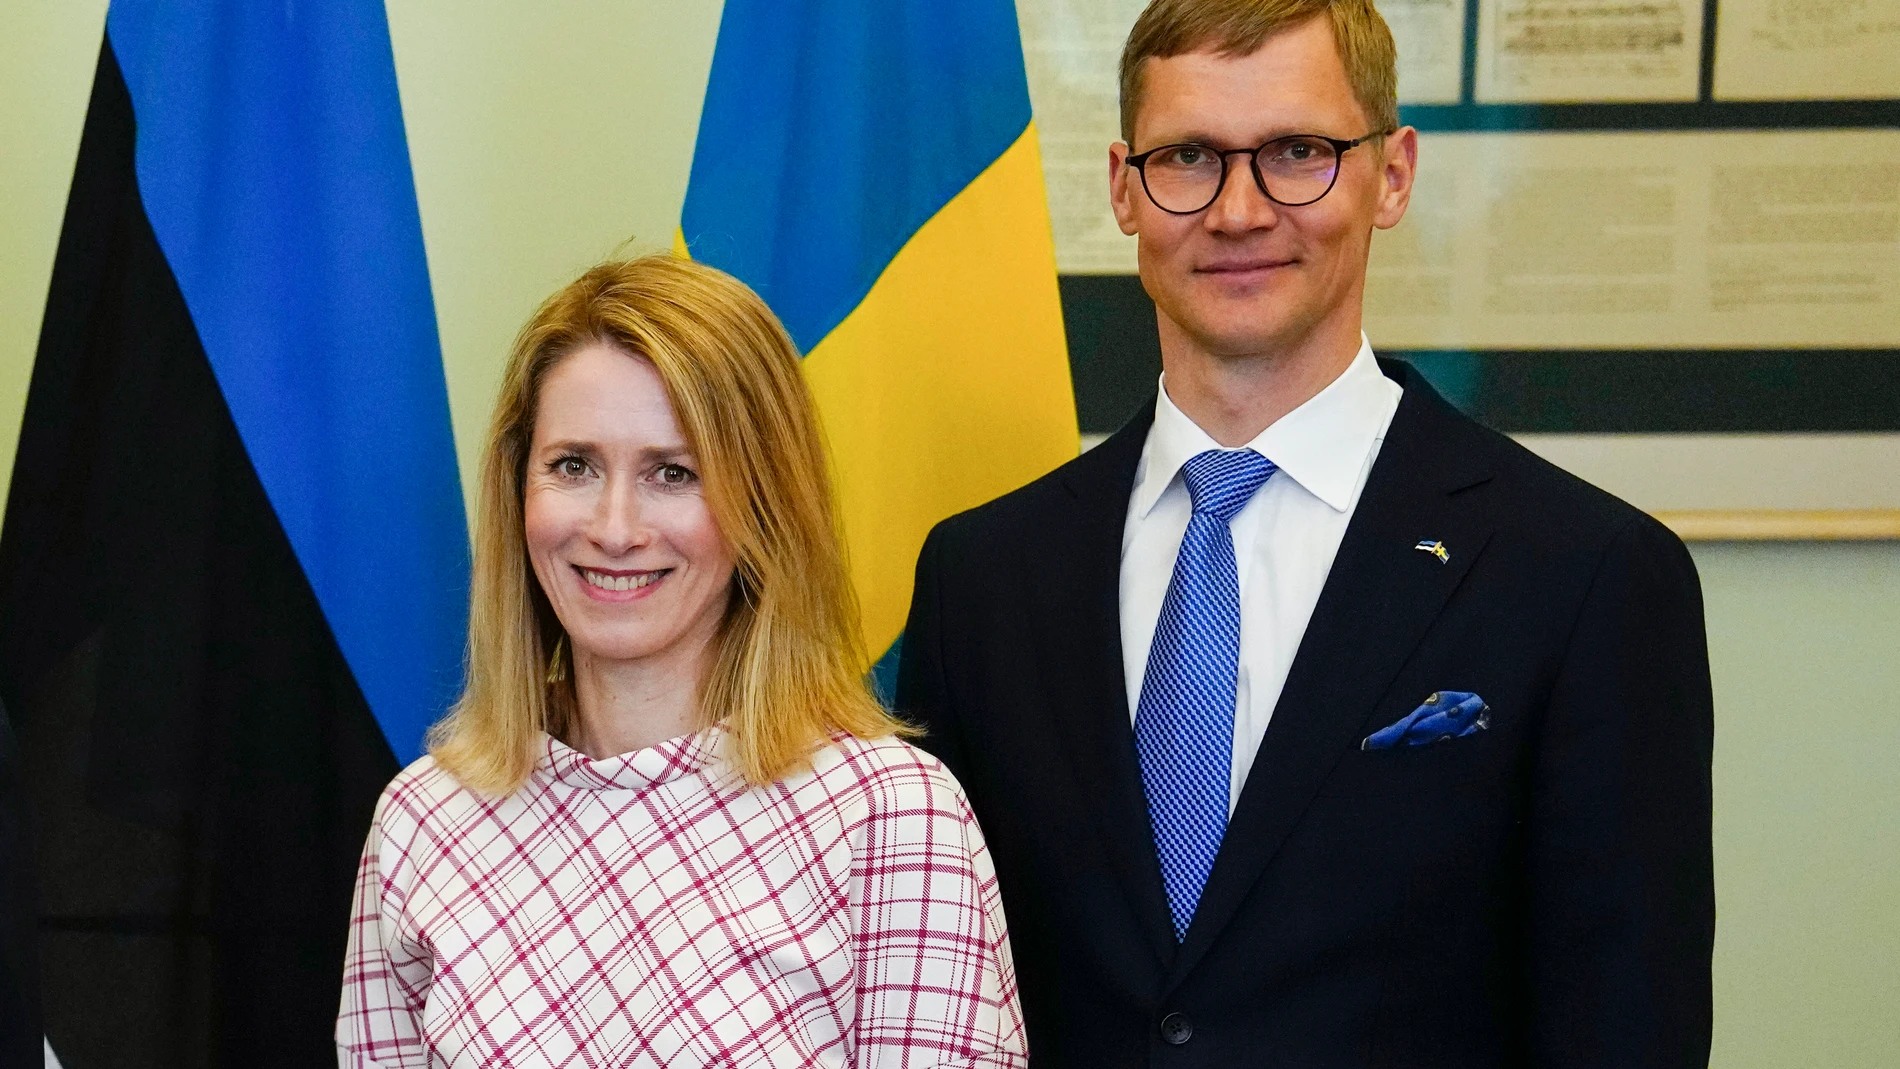 FILE - Estonian Prime Minister Kaja Kallas, left, and her husband Arvo Hallik pose for a picture in Tallinn, Estonia, on May 2, 2023. The husband of Estonia’s government leader said Friday Aug. 25, 2023 he will the sell stakes in a company with ties to Russia, a situation that has caused a crisis for Estonian Prime Minister Kaja Kallas, one of Europe’s most outspoken supporters of Ukraine. (AP Photo/Pavel Golovkin, File)